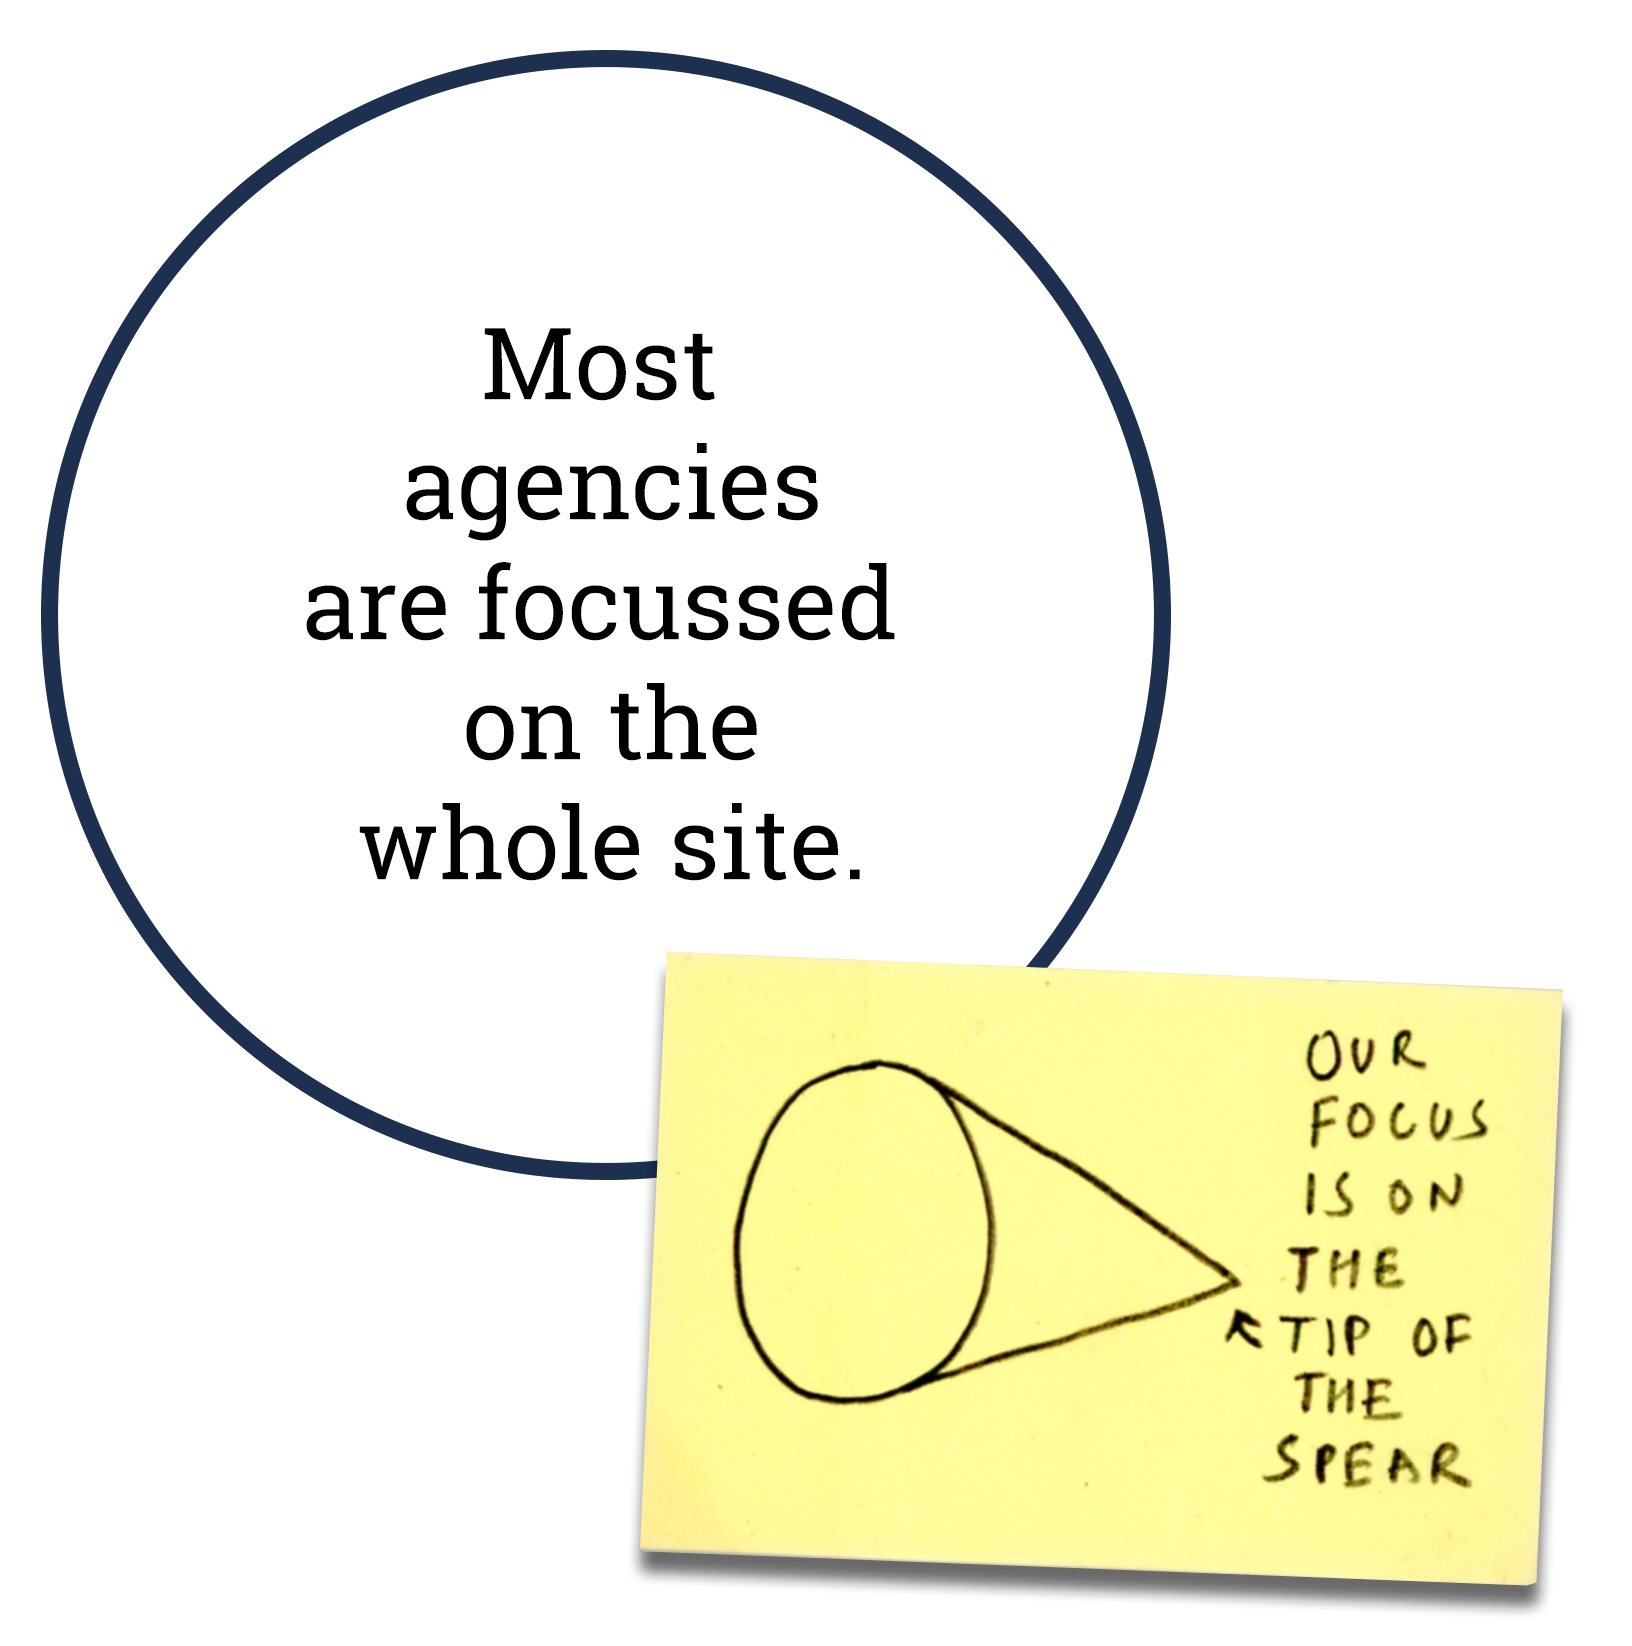 How Most Agencies Think About CRO. We focus on the tip of the spear.